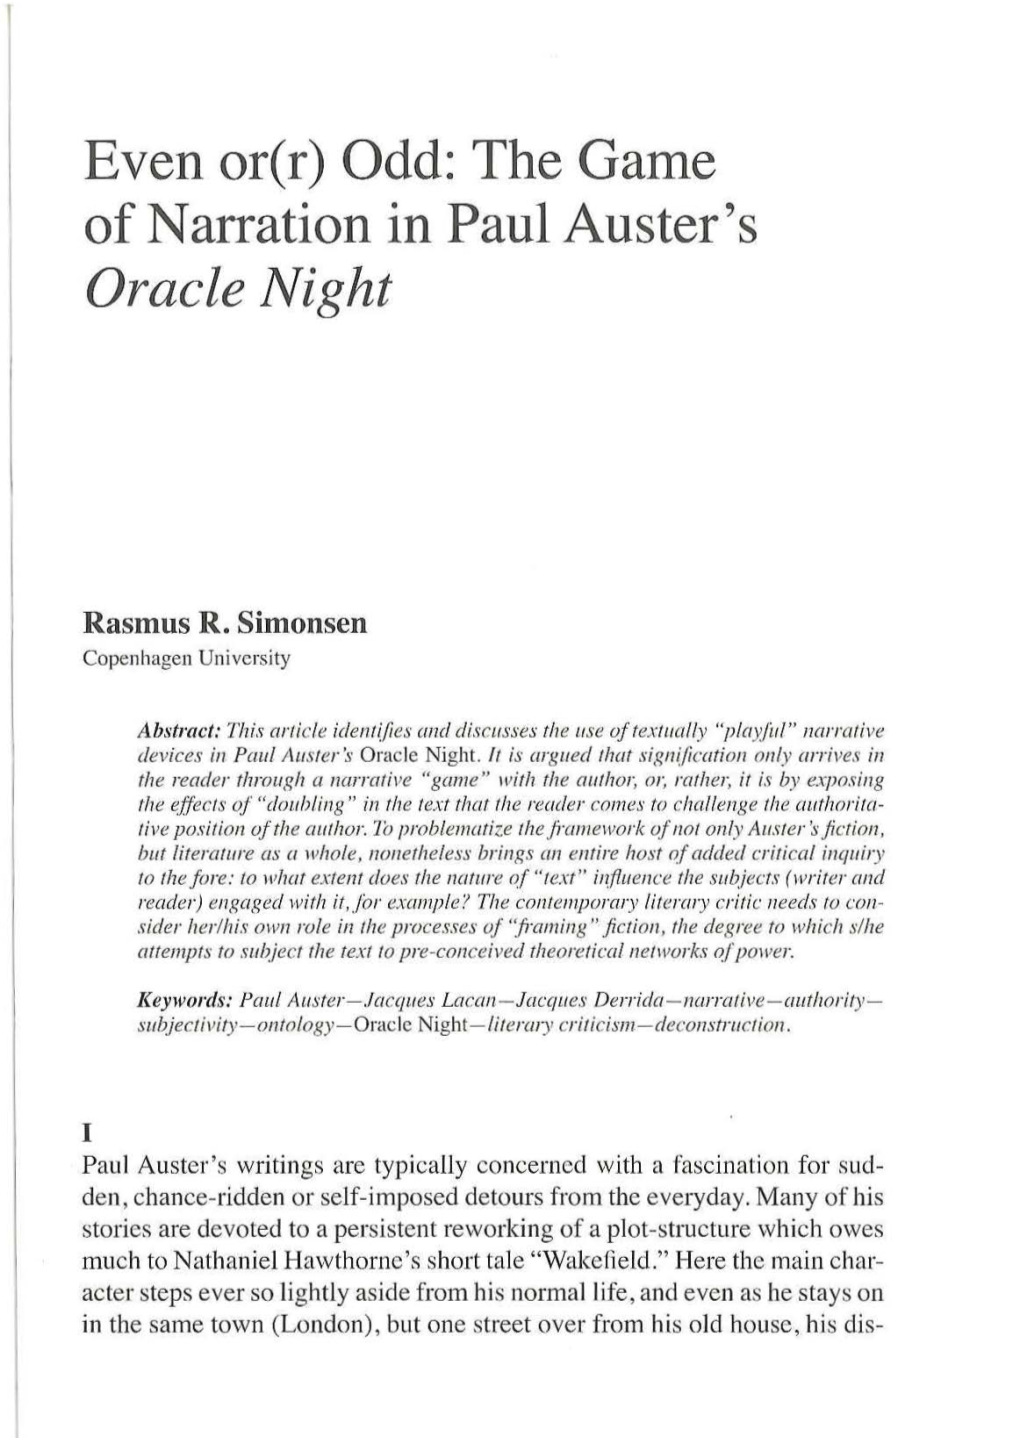 The Game of Narration in Paul Auster's Oracle Night